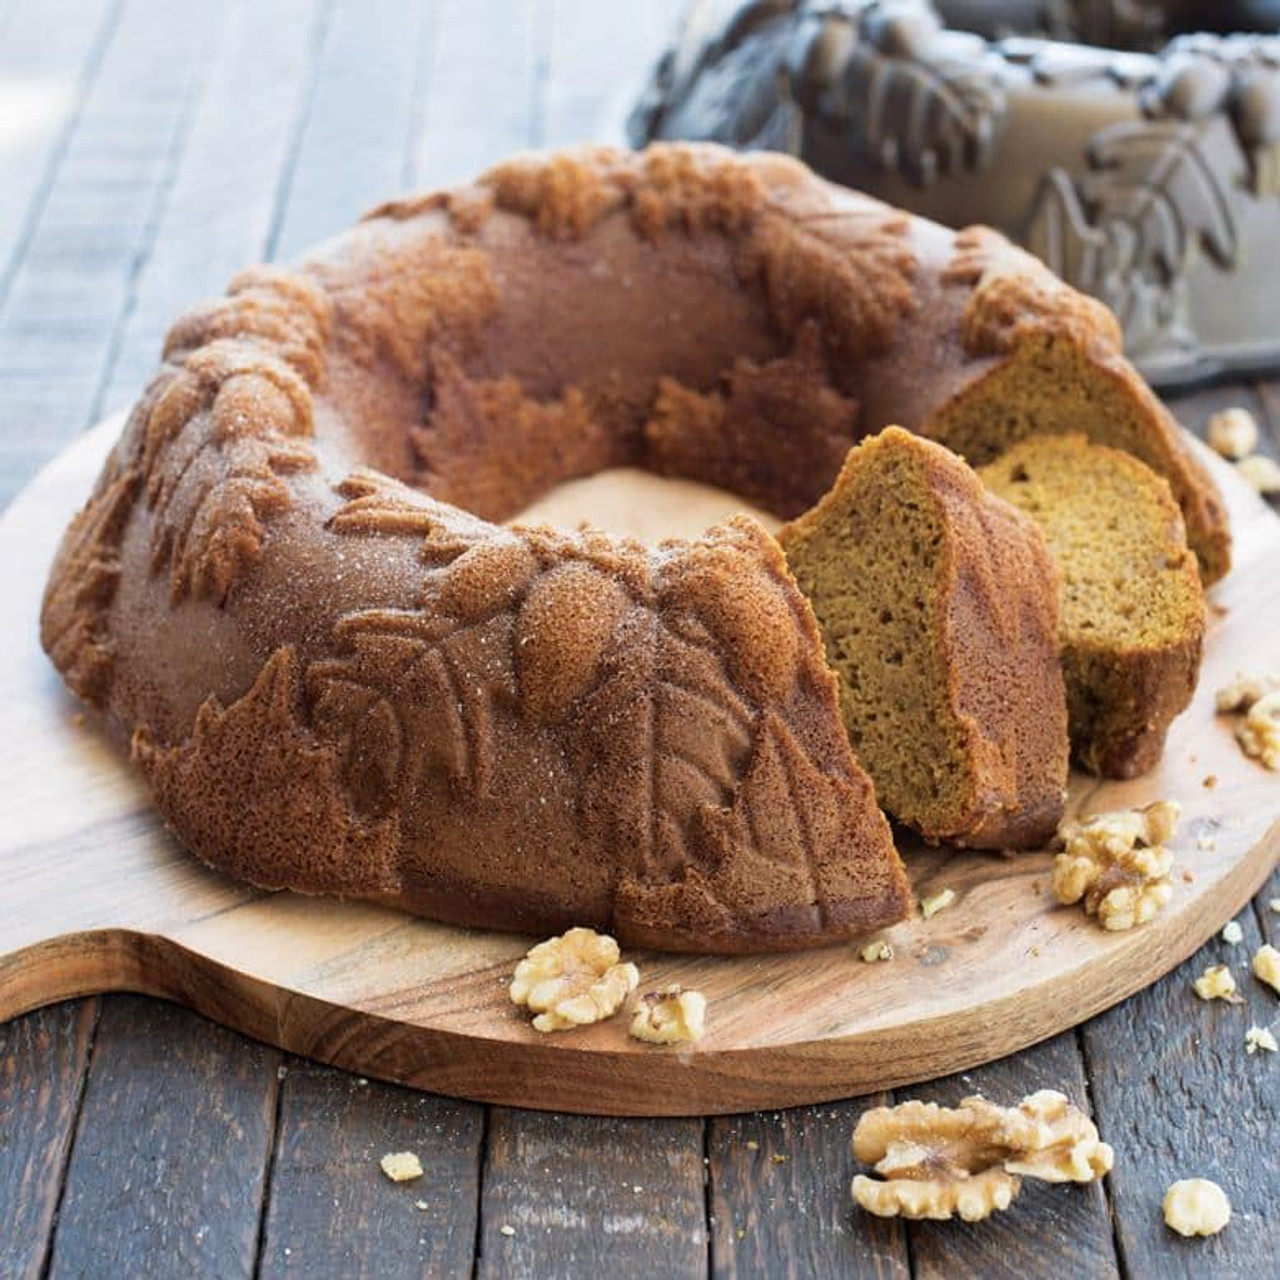 https://cdn11.bigcommerce.com/s-hccytny0od/images/stencil/1280x1280/products/729/3975/nordic-ware-autumn-wreath-bundt-pan-1__32354.1576267399.jpg?c=2?imbypass=on